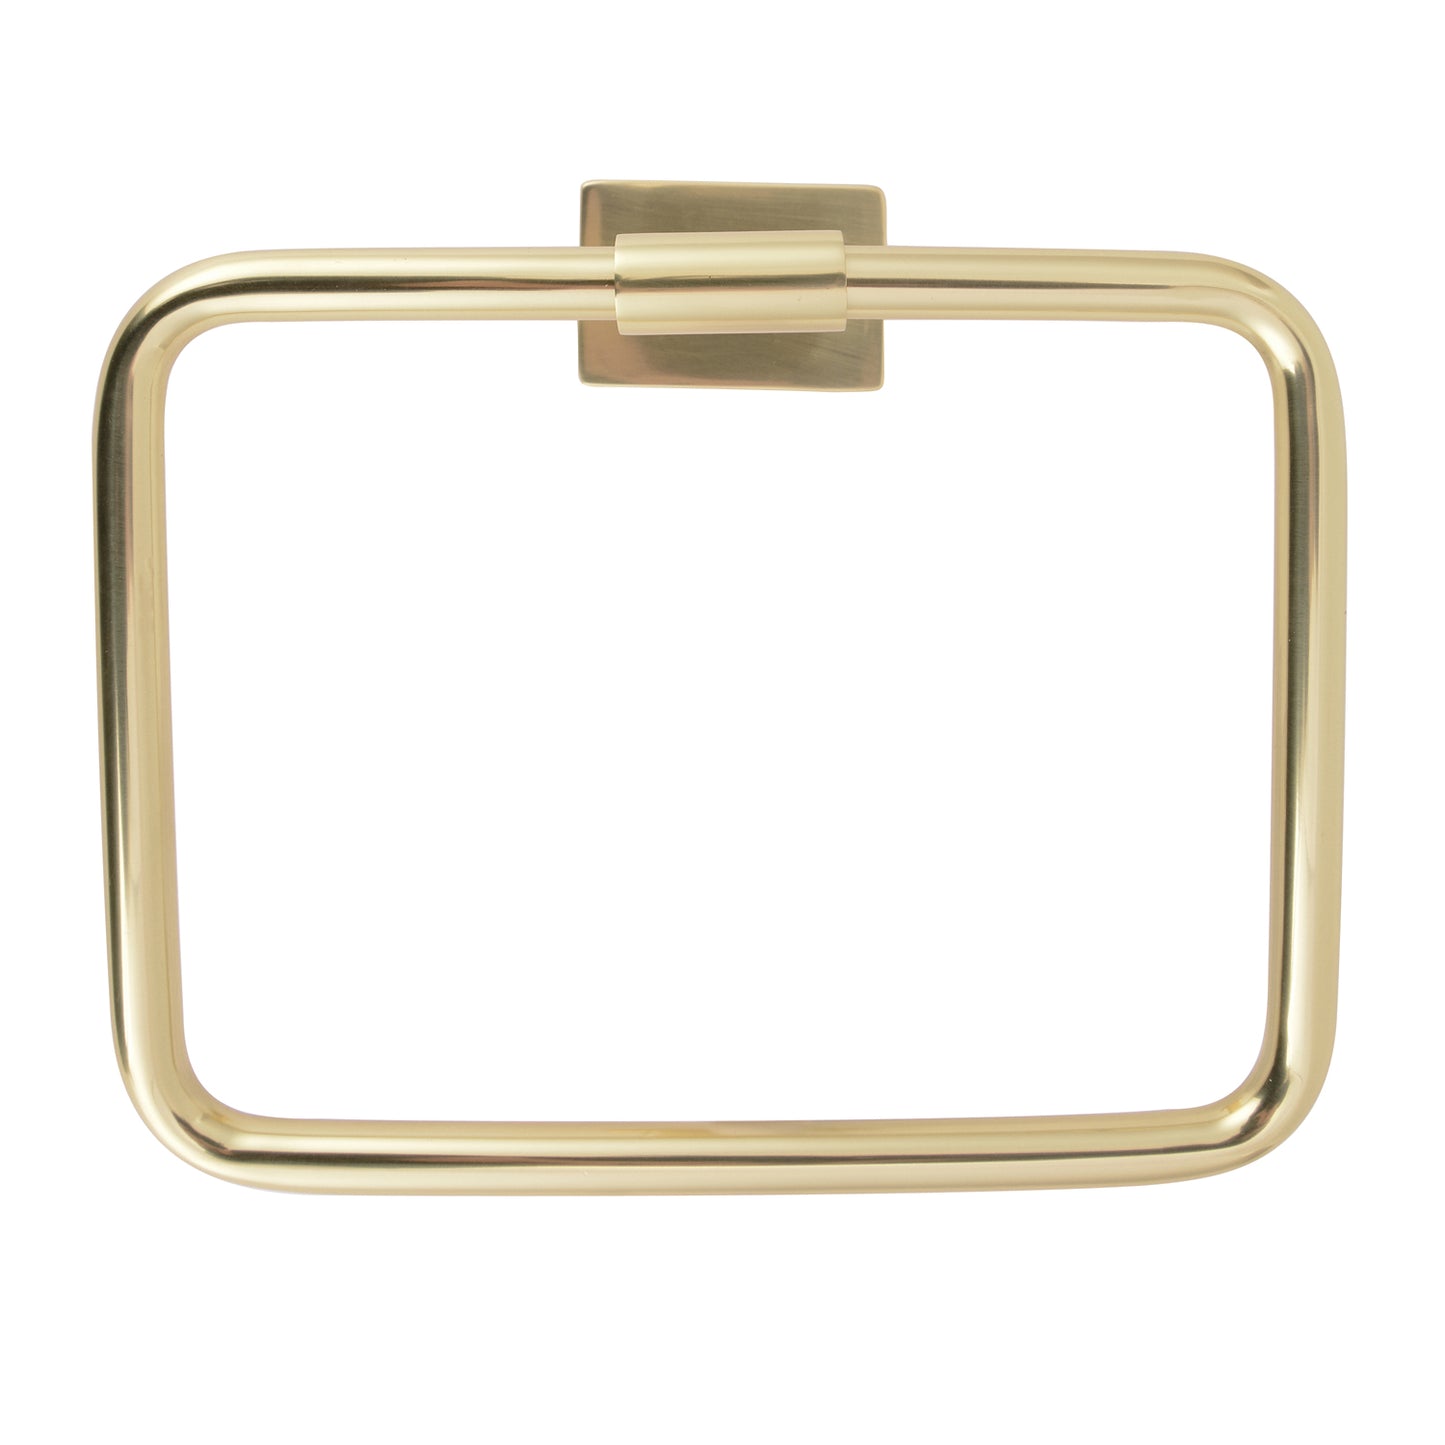 Nayland Towel Ring in Antique Brass